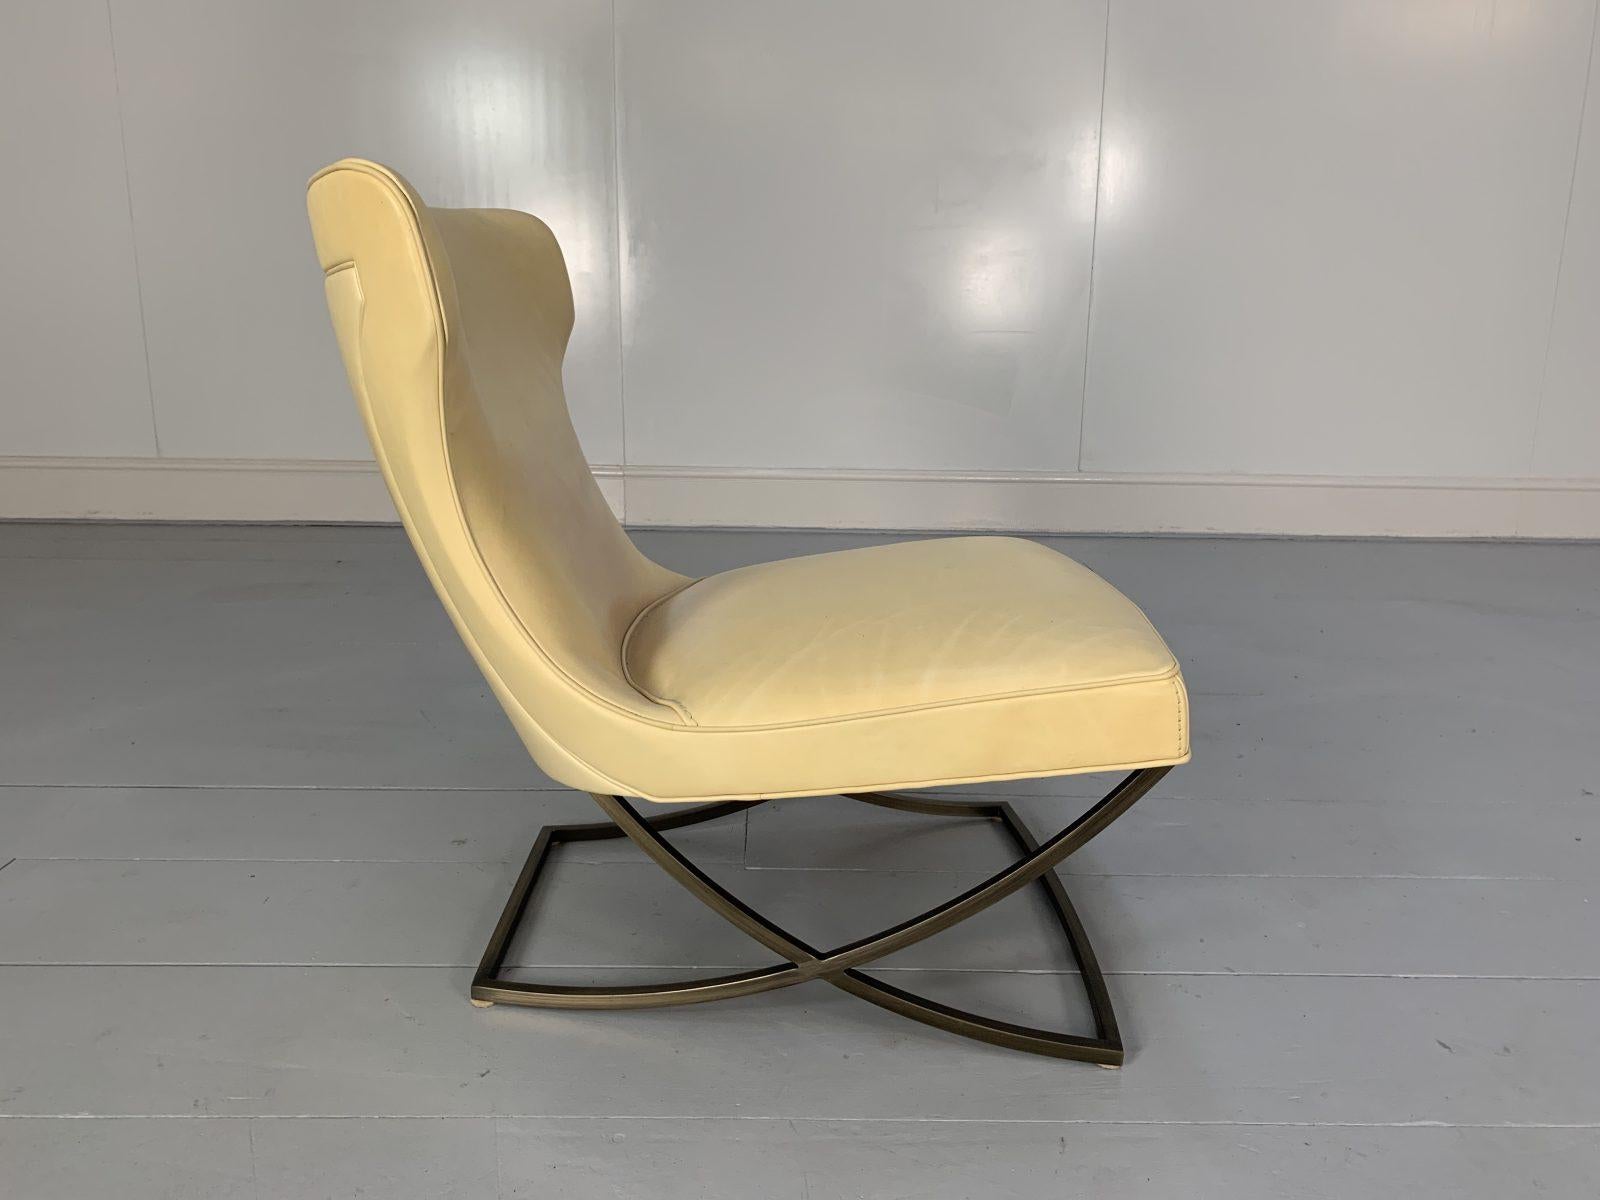 Pair of Baxter “Paloma” Chairs, in Cream Leather For Sale 3